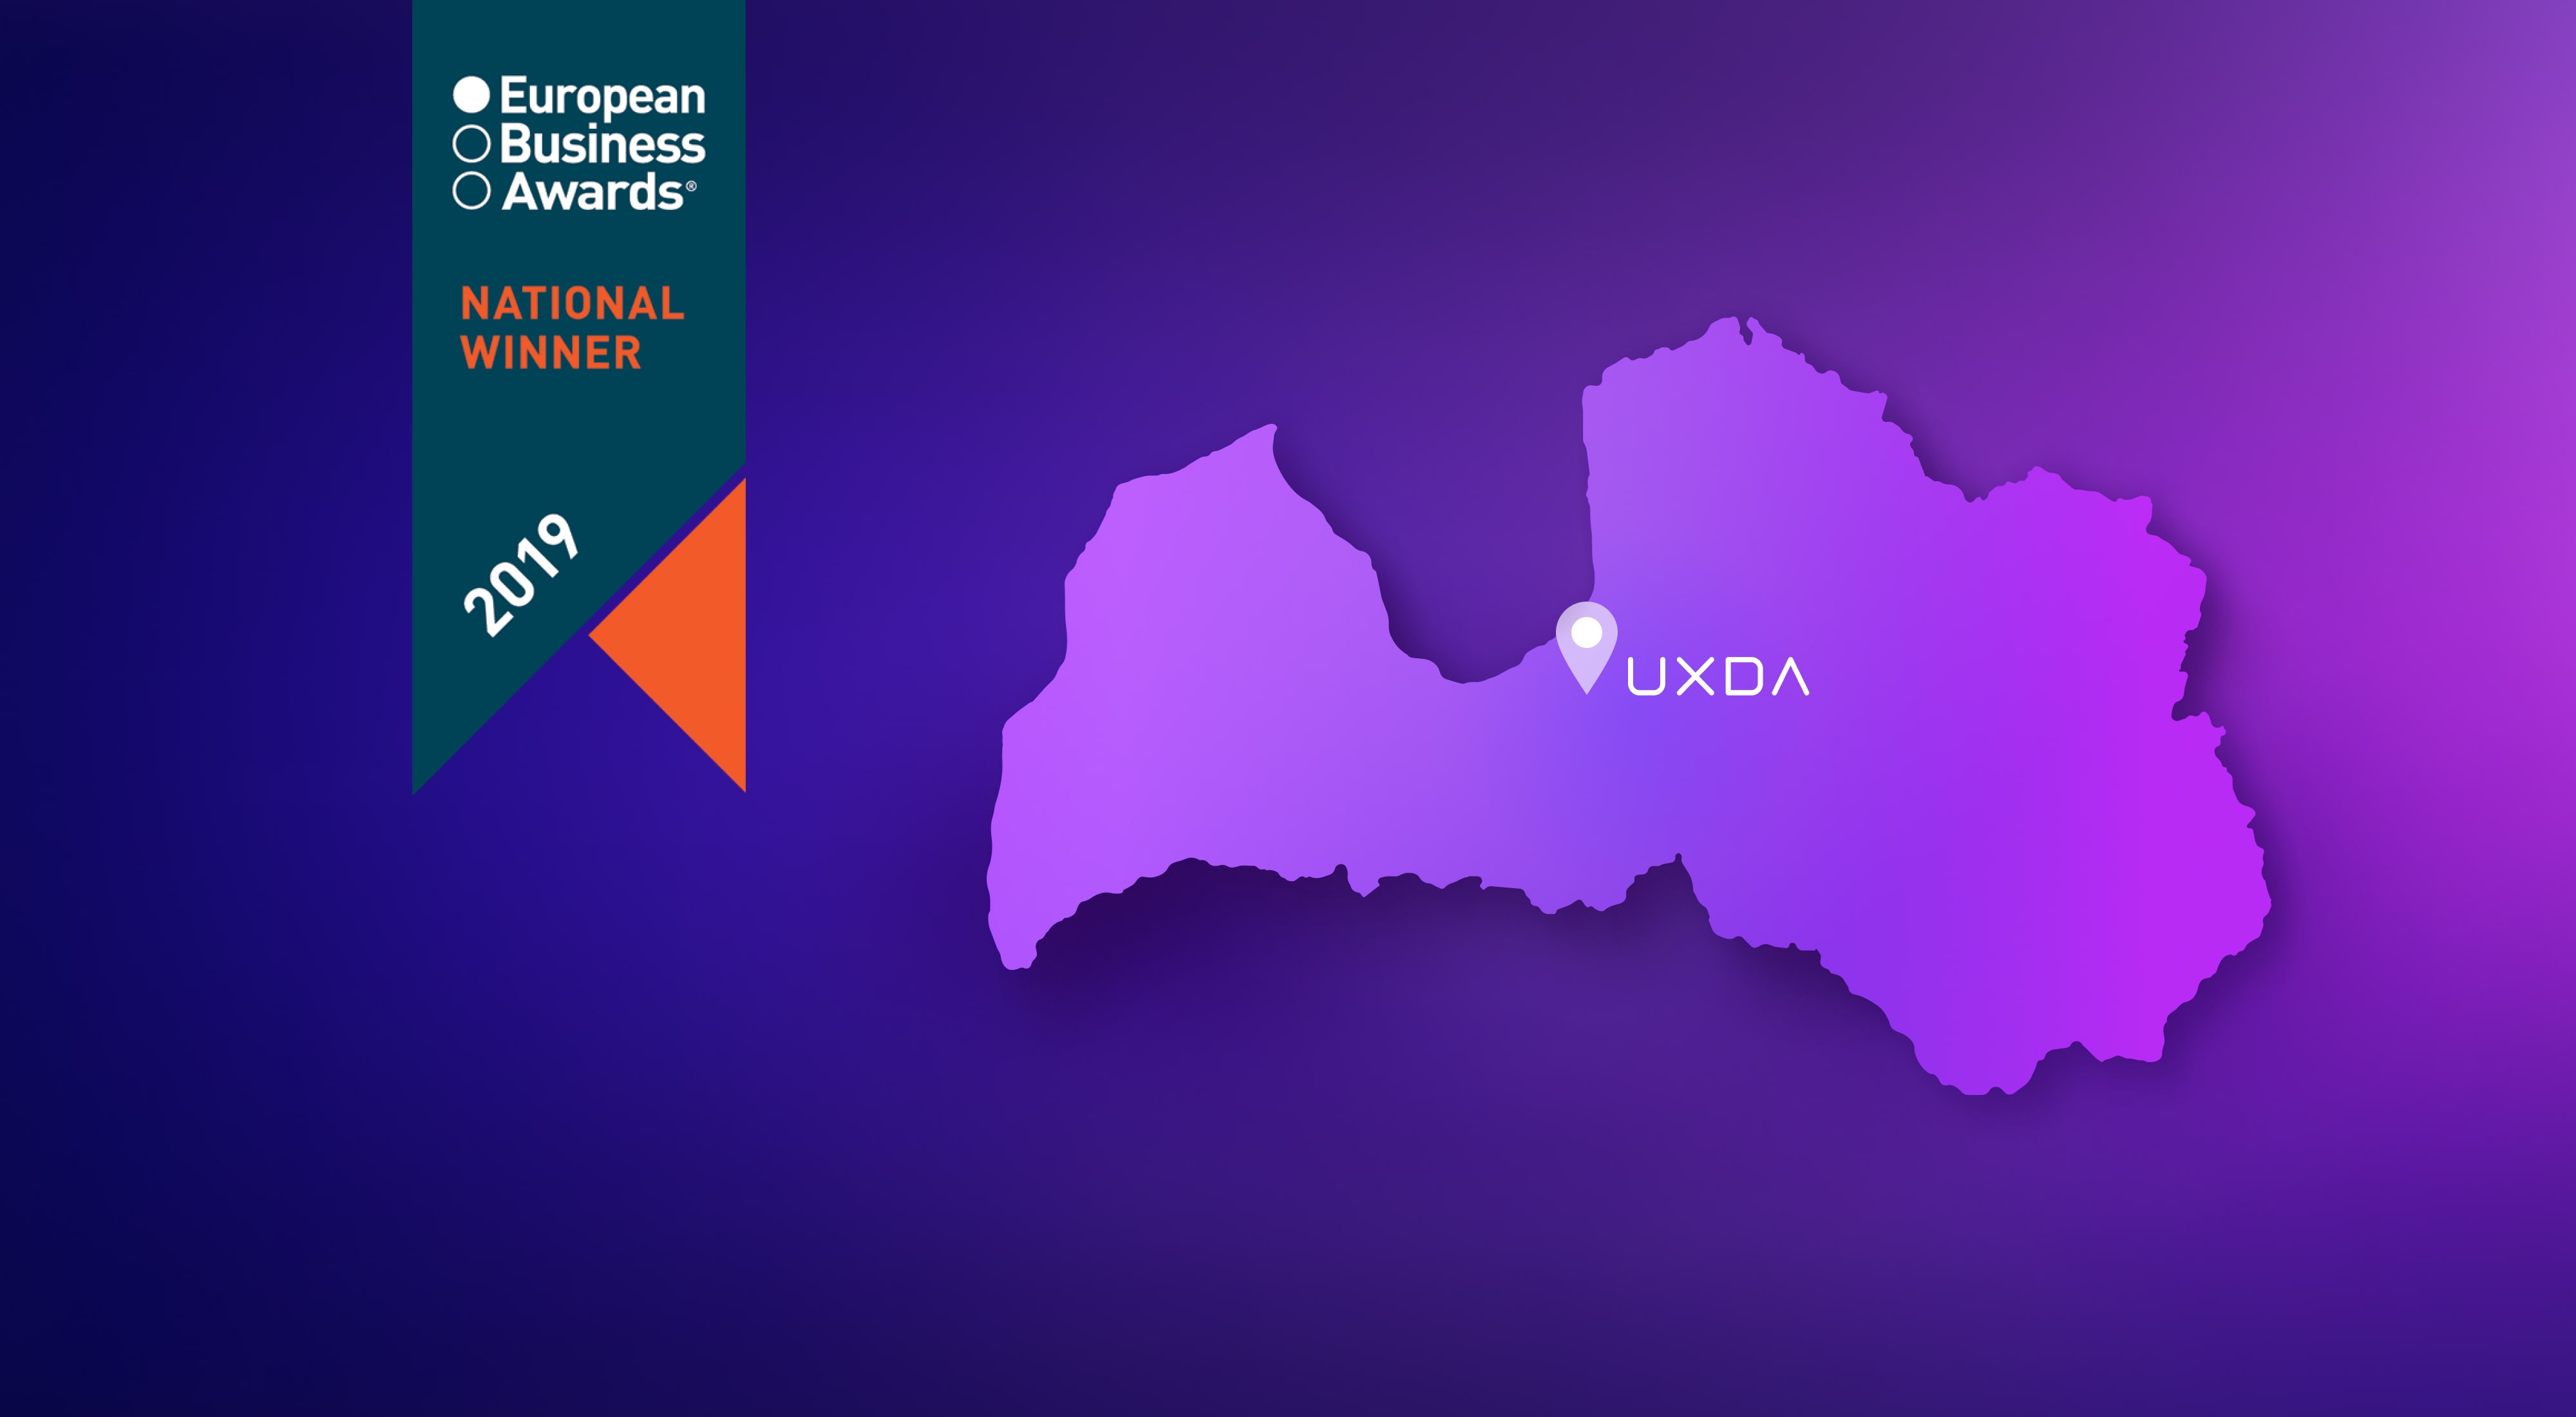 UXDA Becomes The National Winner Of The 2019 European Business Awards